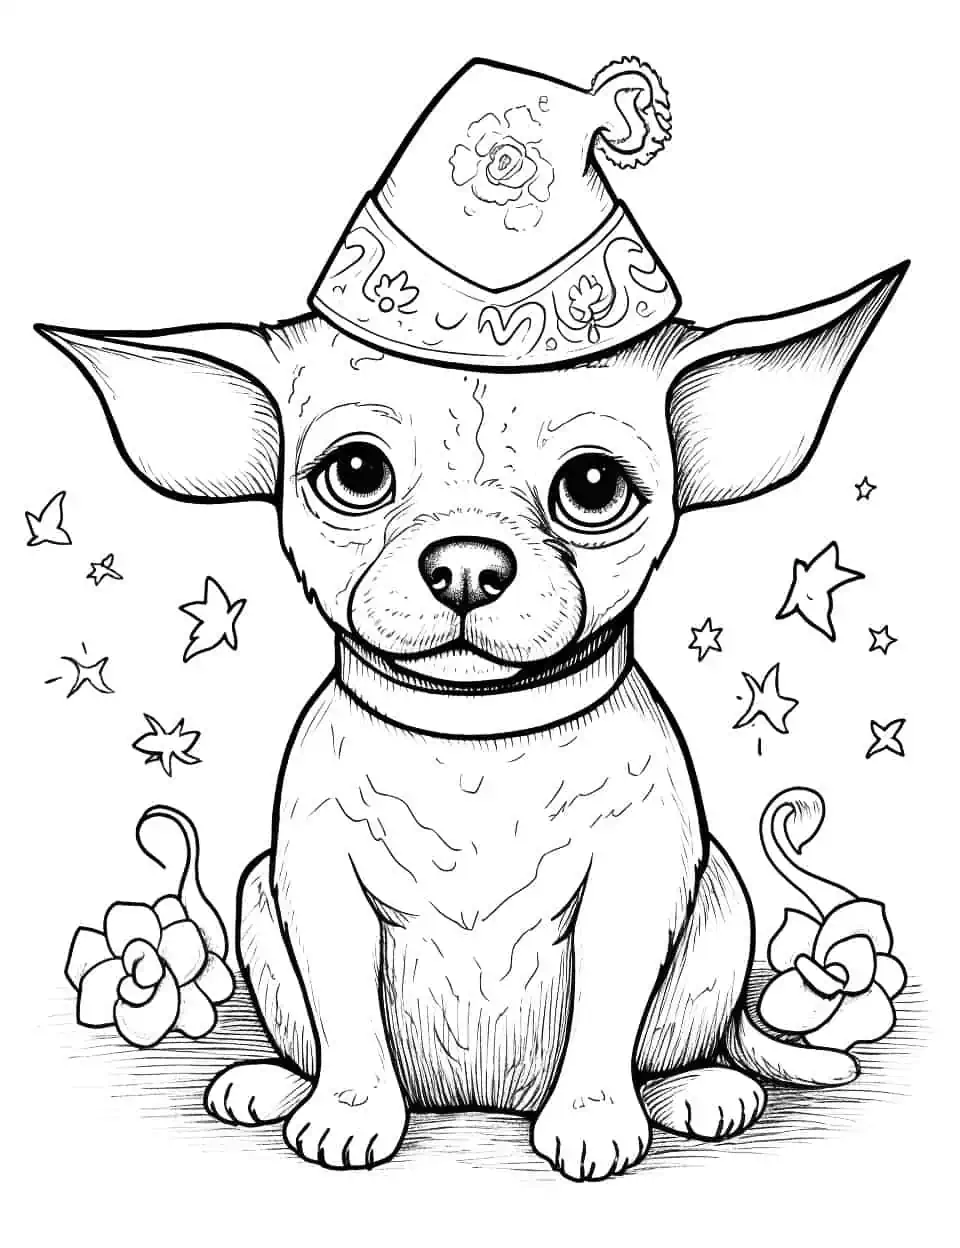 Chihuahua Fiesta Dog Coloring Page - A Chihuahua wearing a funny hat, surrounded by decorations.